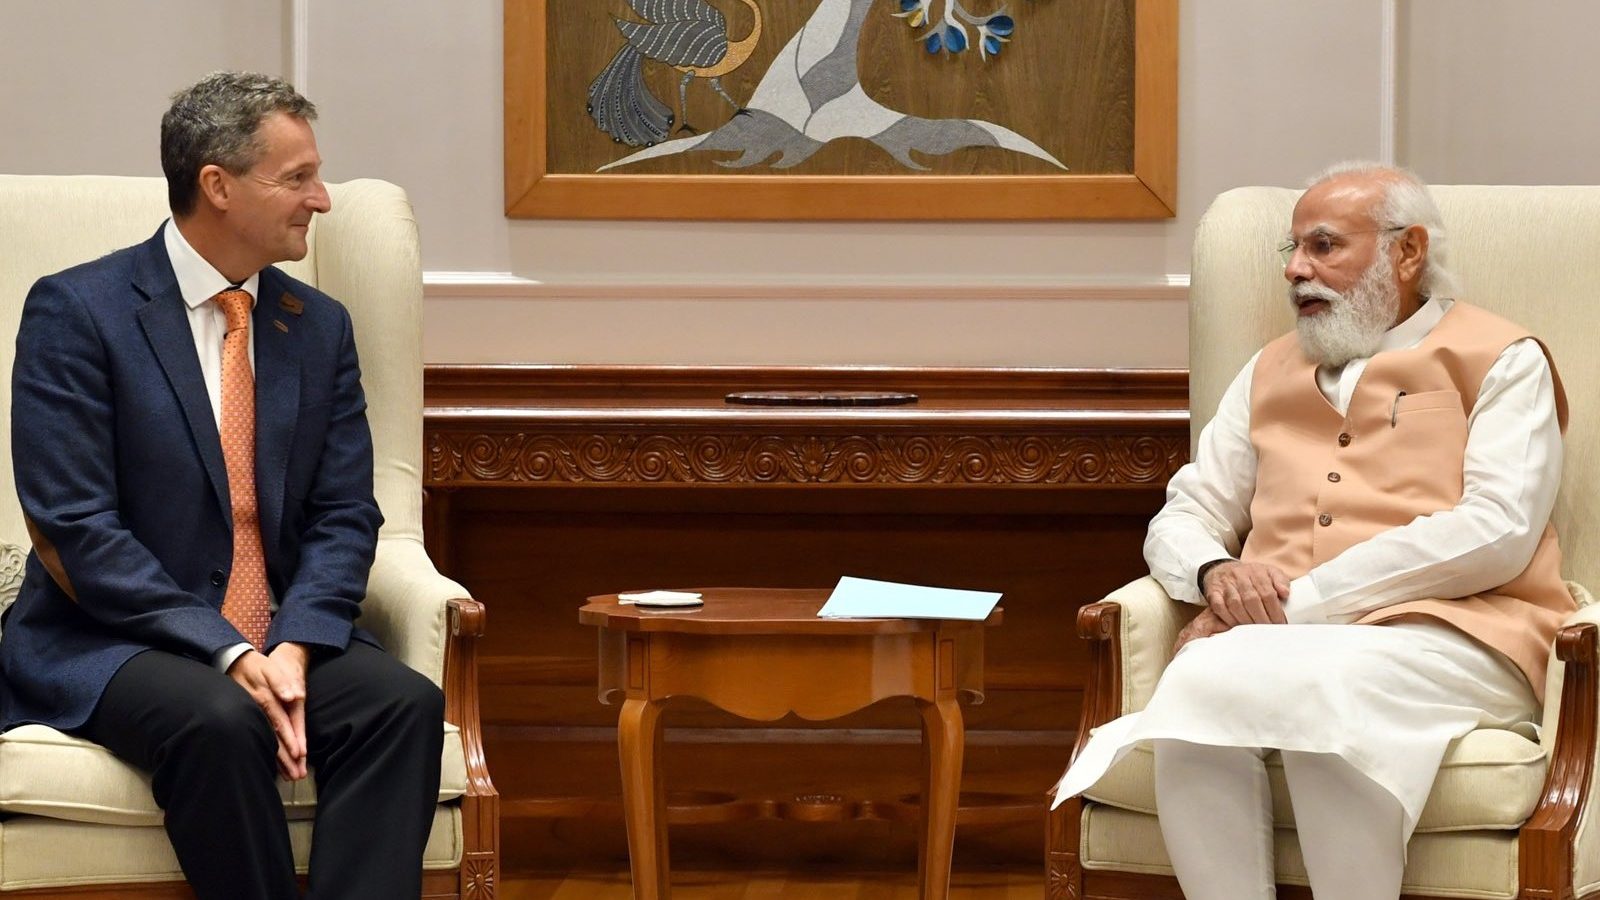 Could Foreign Unis Come to India Soon? PM Modi Holds ‘Productive’ Meeting with QS Ranking CEO